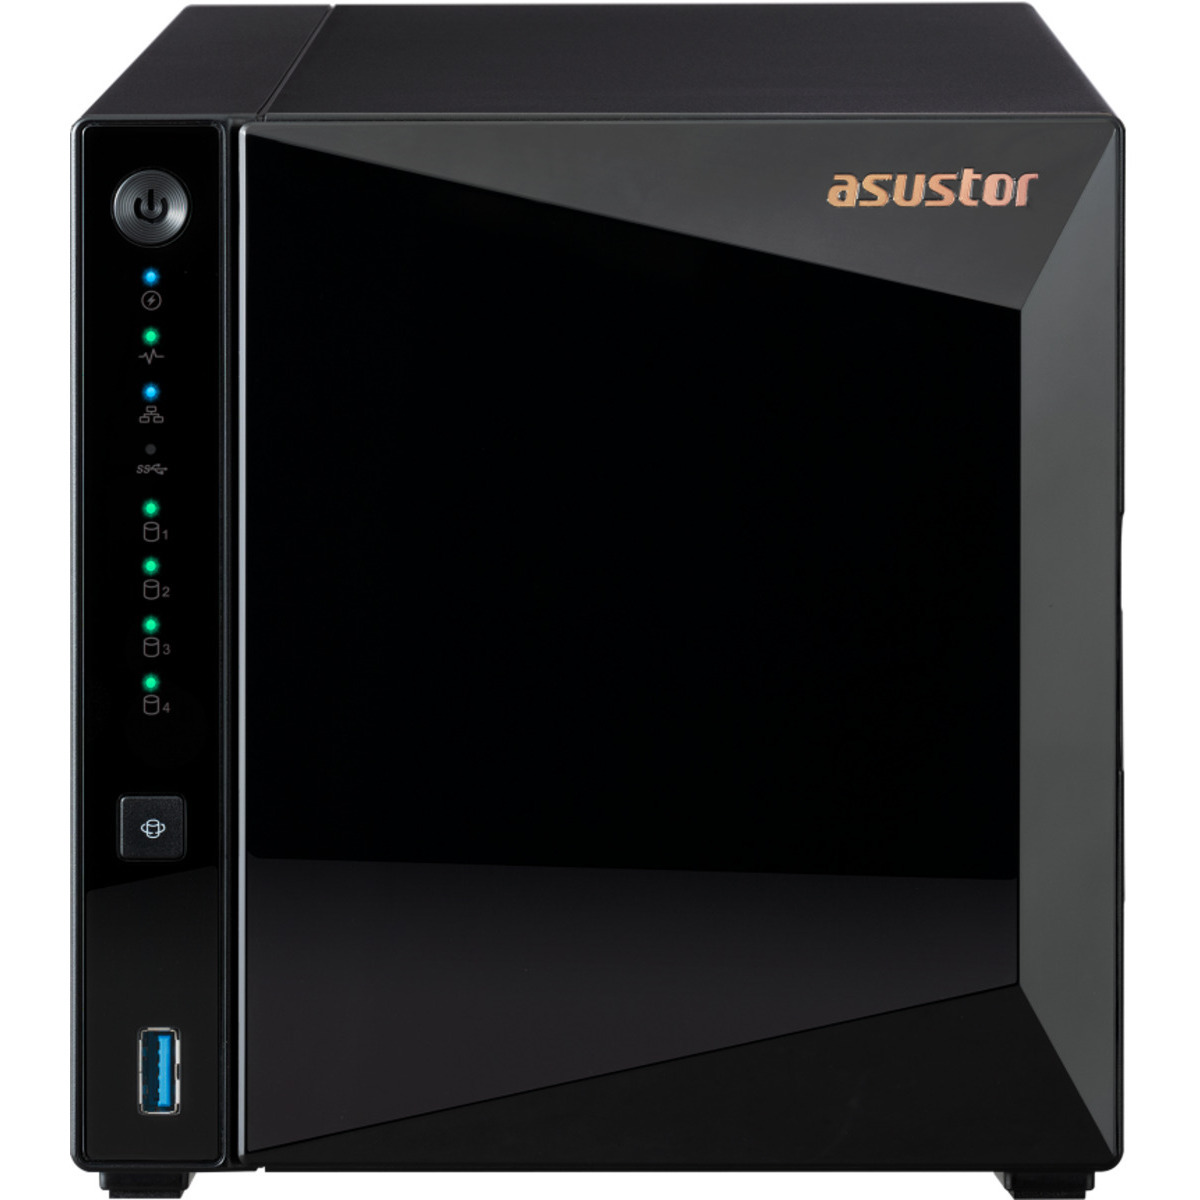 ASUSTOR DRIVESTOR 4 Pro AS3304T 8tb 4-Bay Desktop Personal / Basic Home / Small Office NAS - Network Attached Storage Device 2x4tb Western Digital Gold WD4003FRYZ 3.5 7200rpm SATA 6Gb/s HDD ENTERPRISE Class Drives Installed - Burn-In Tested DRIVESTOR 4 Pro AS3304T